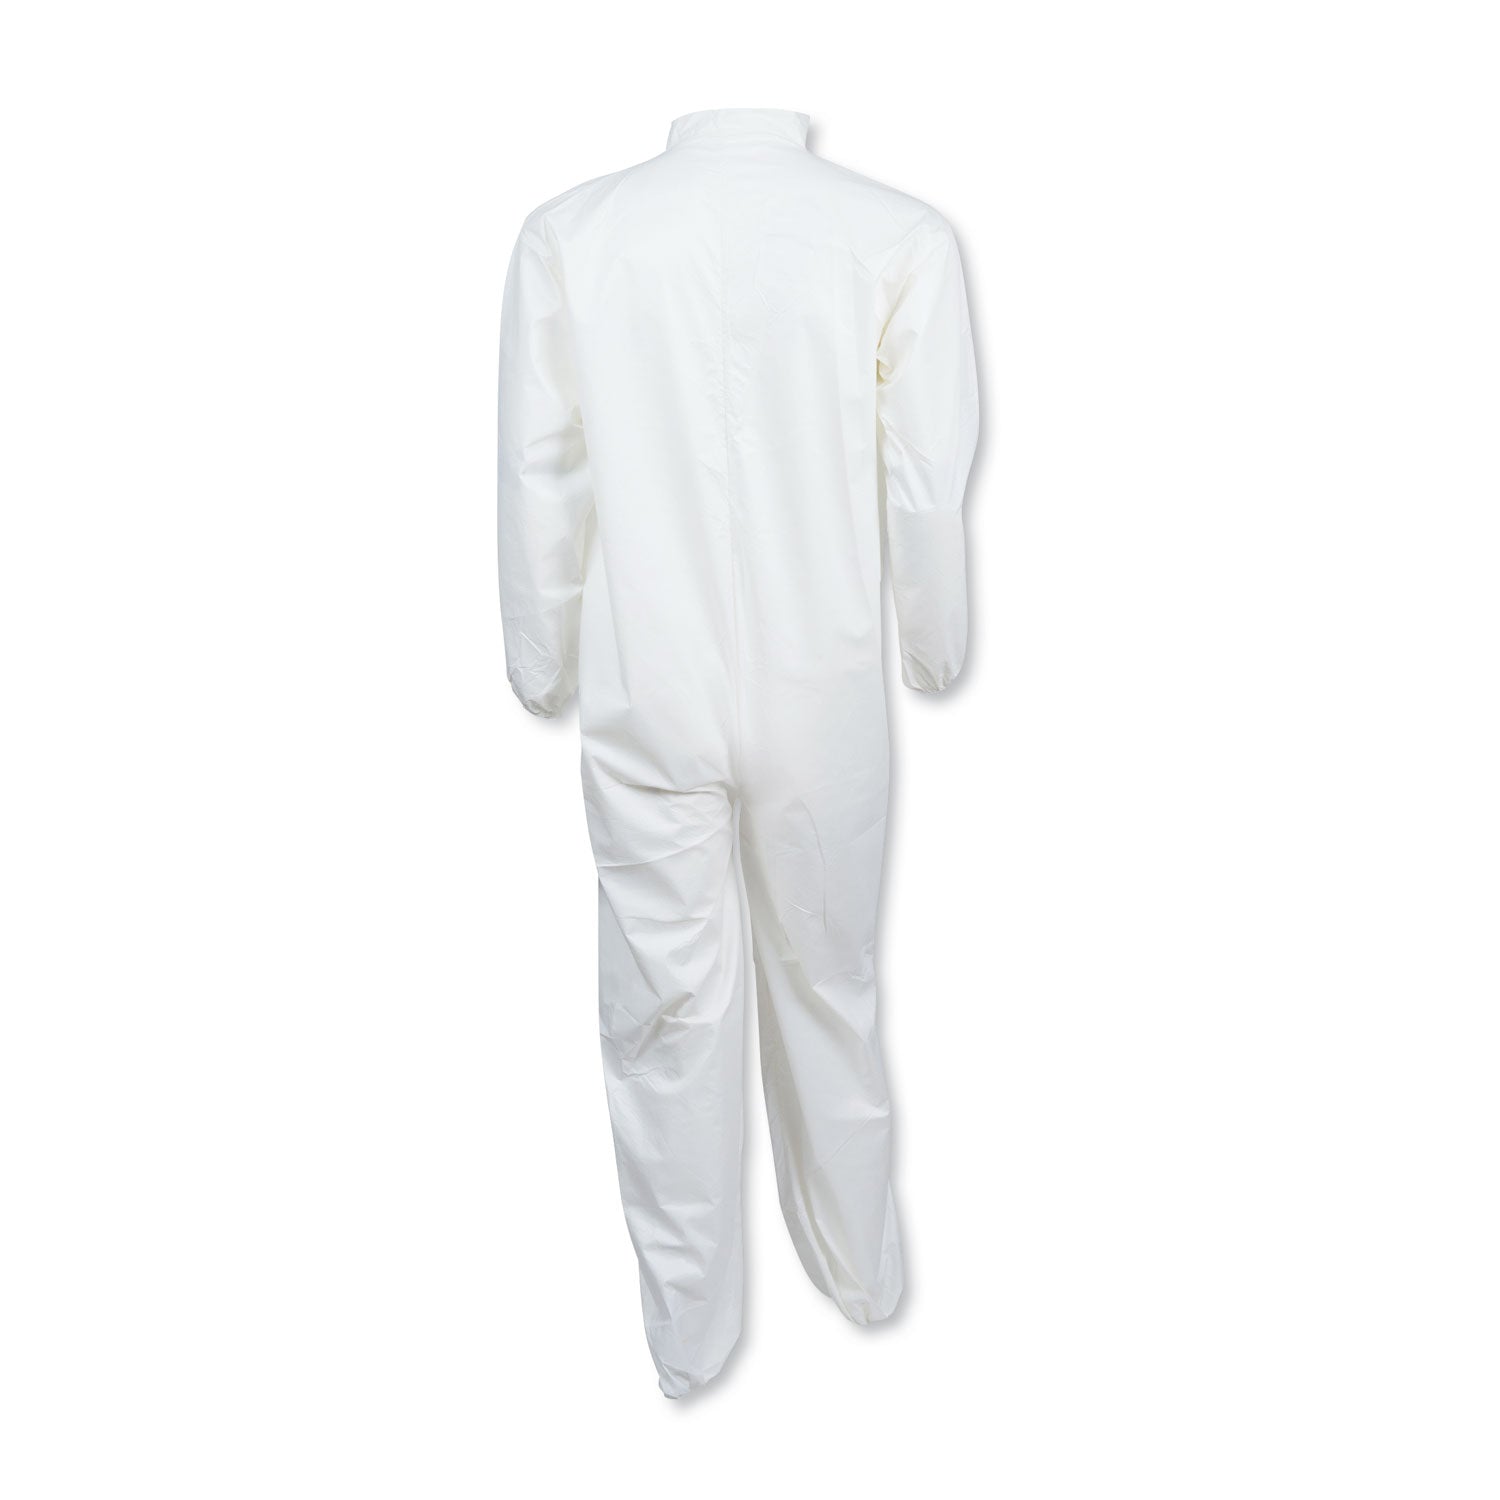 a40-coveralls-elastic-wrists-ankles-x-large-white_kcc44314 - 6